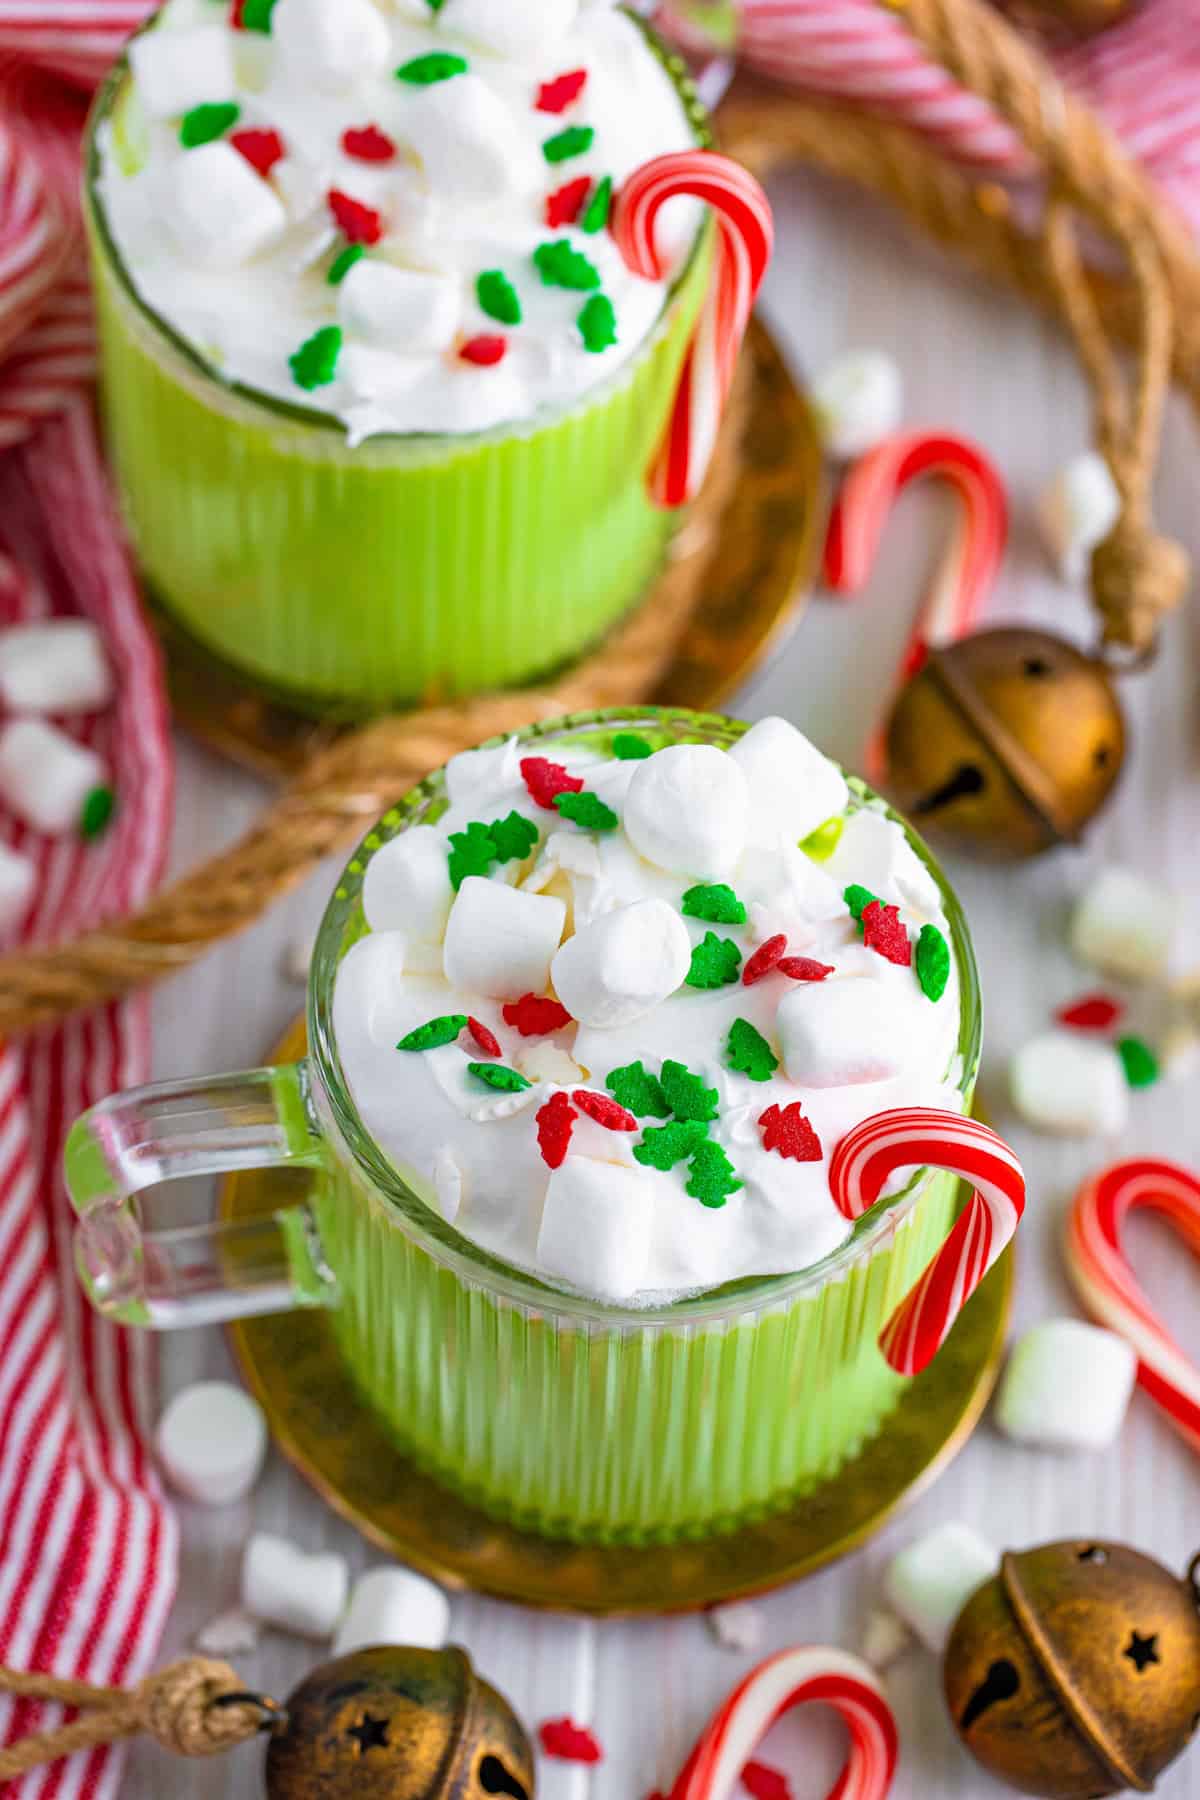 Green Christmas hot chocolate topped with whipped cream, mini marshmallows, and holiday sprinkles.